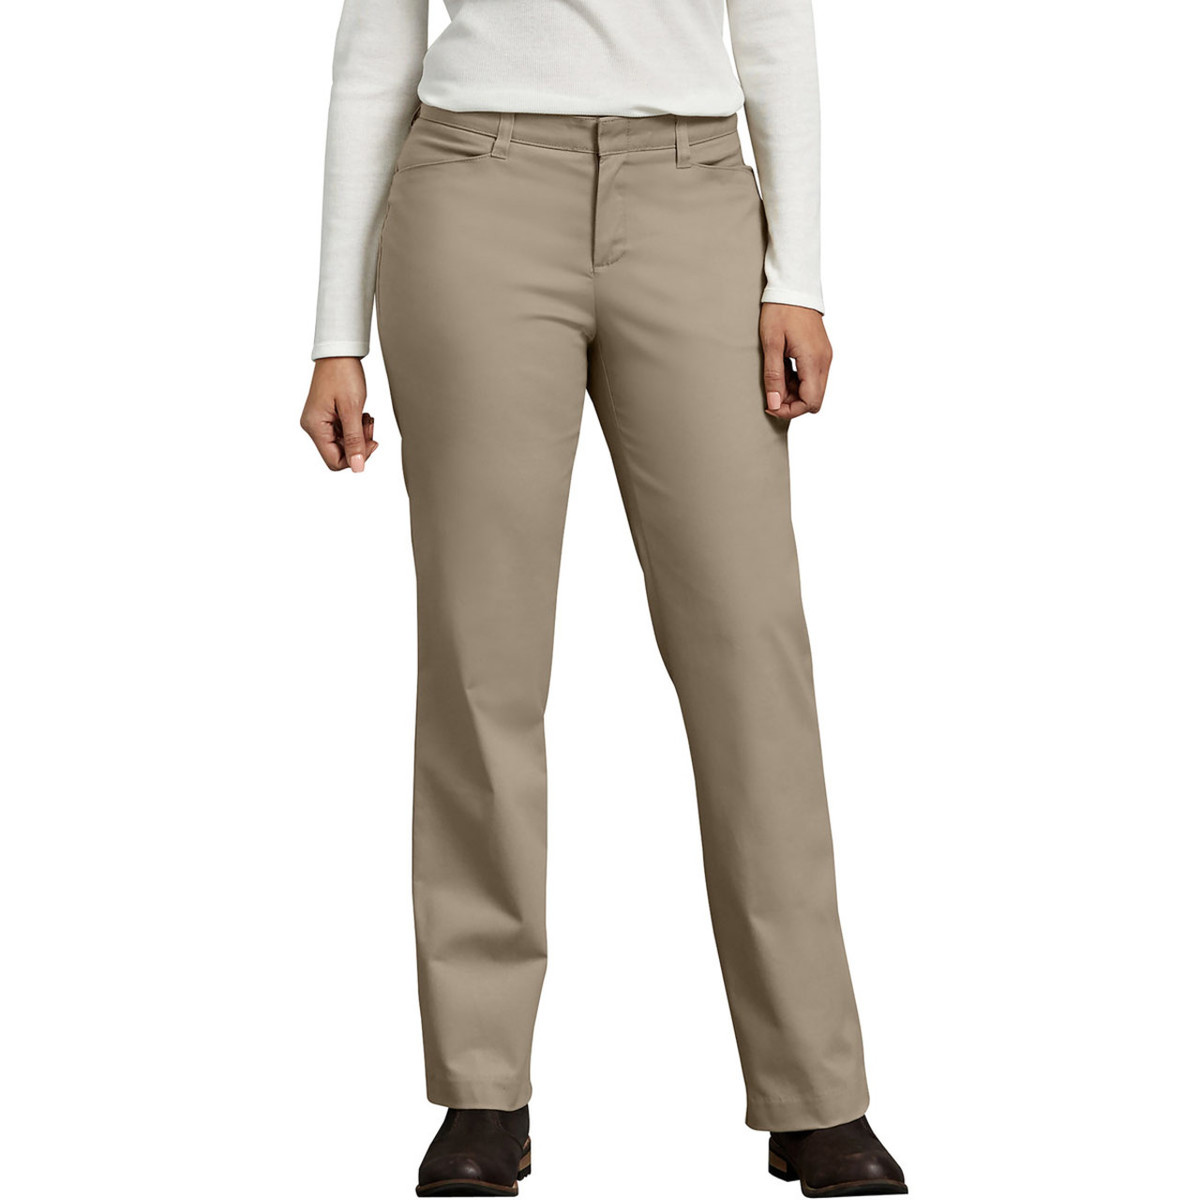 Dickies' Women's Stretch Pant - Now